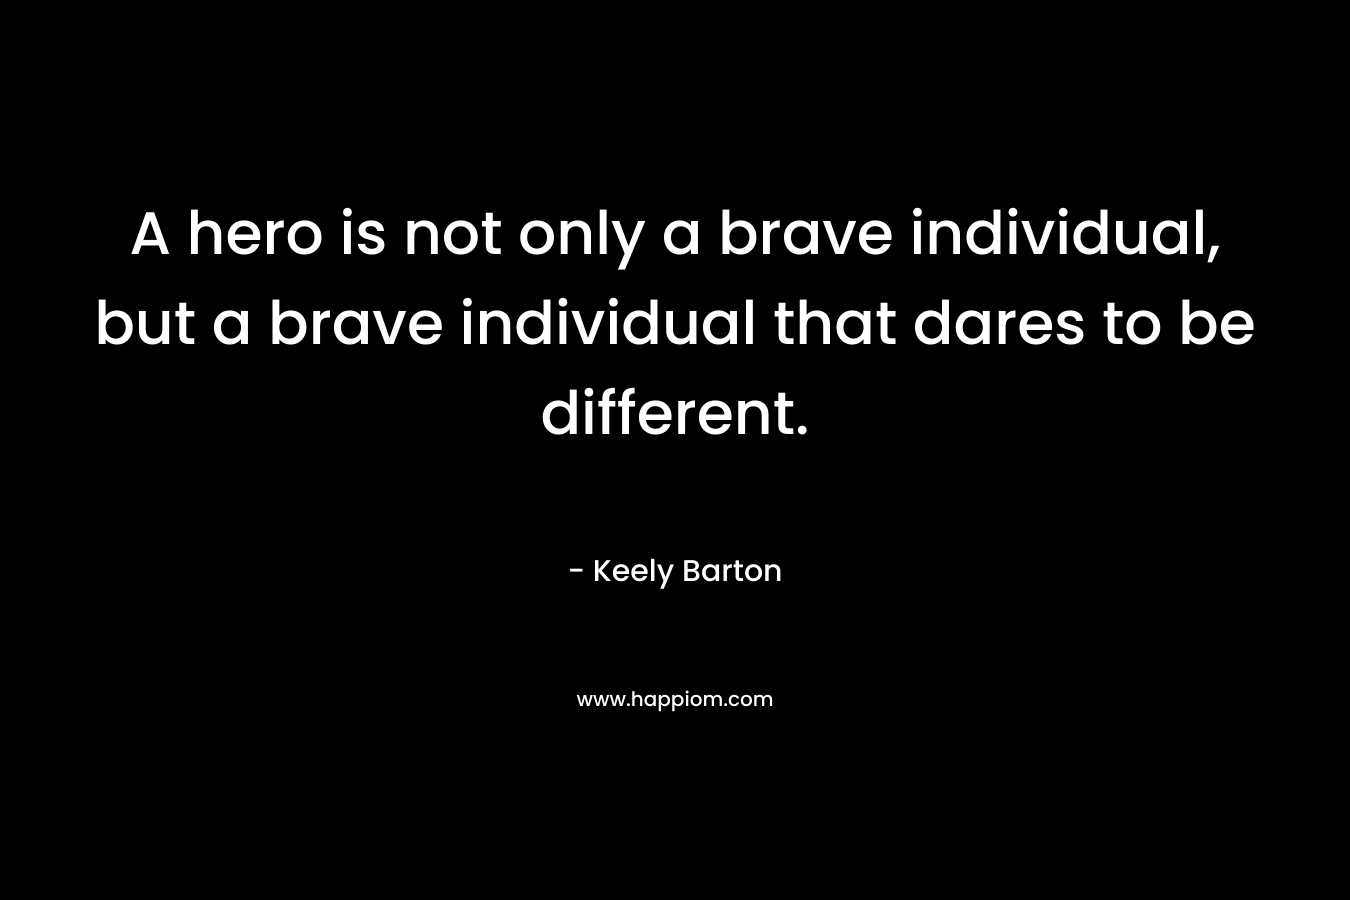 A hero is not only a brave individual, but a brave individual that dares to be different. – Keely Barton